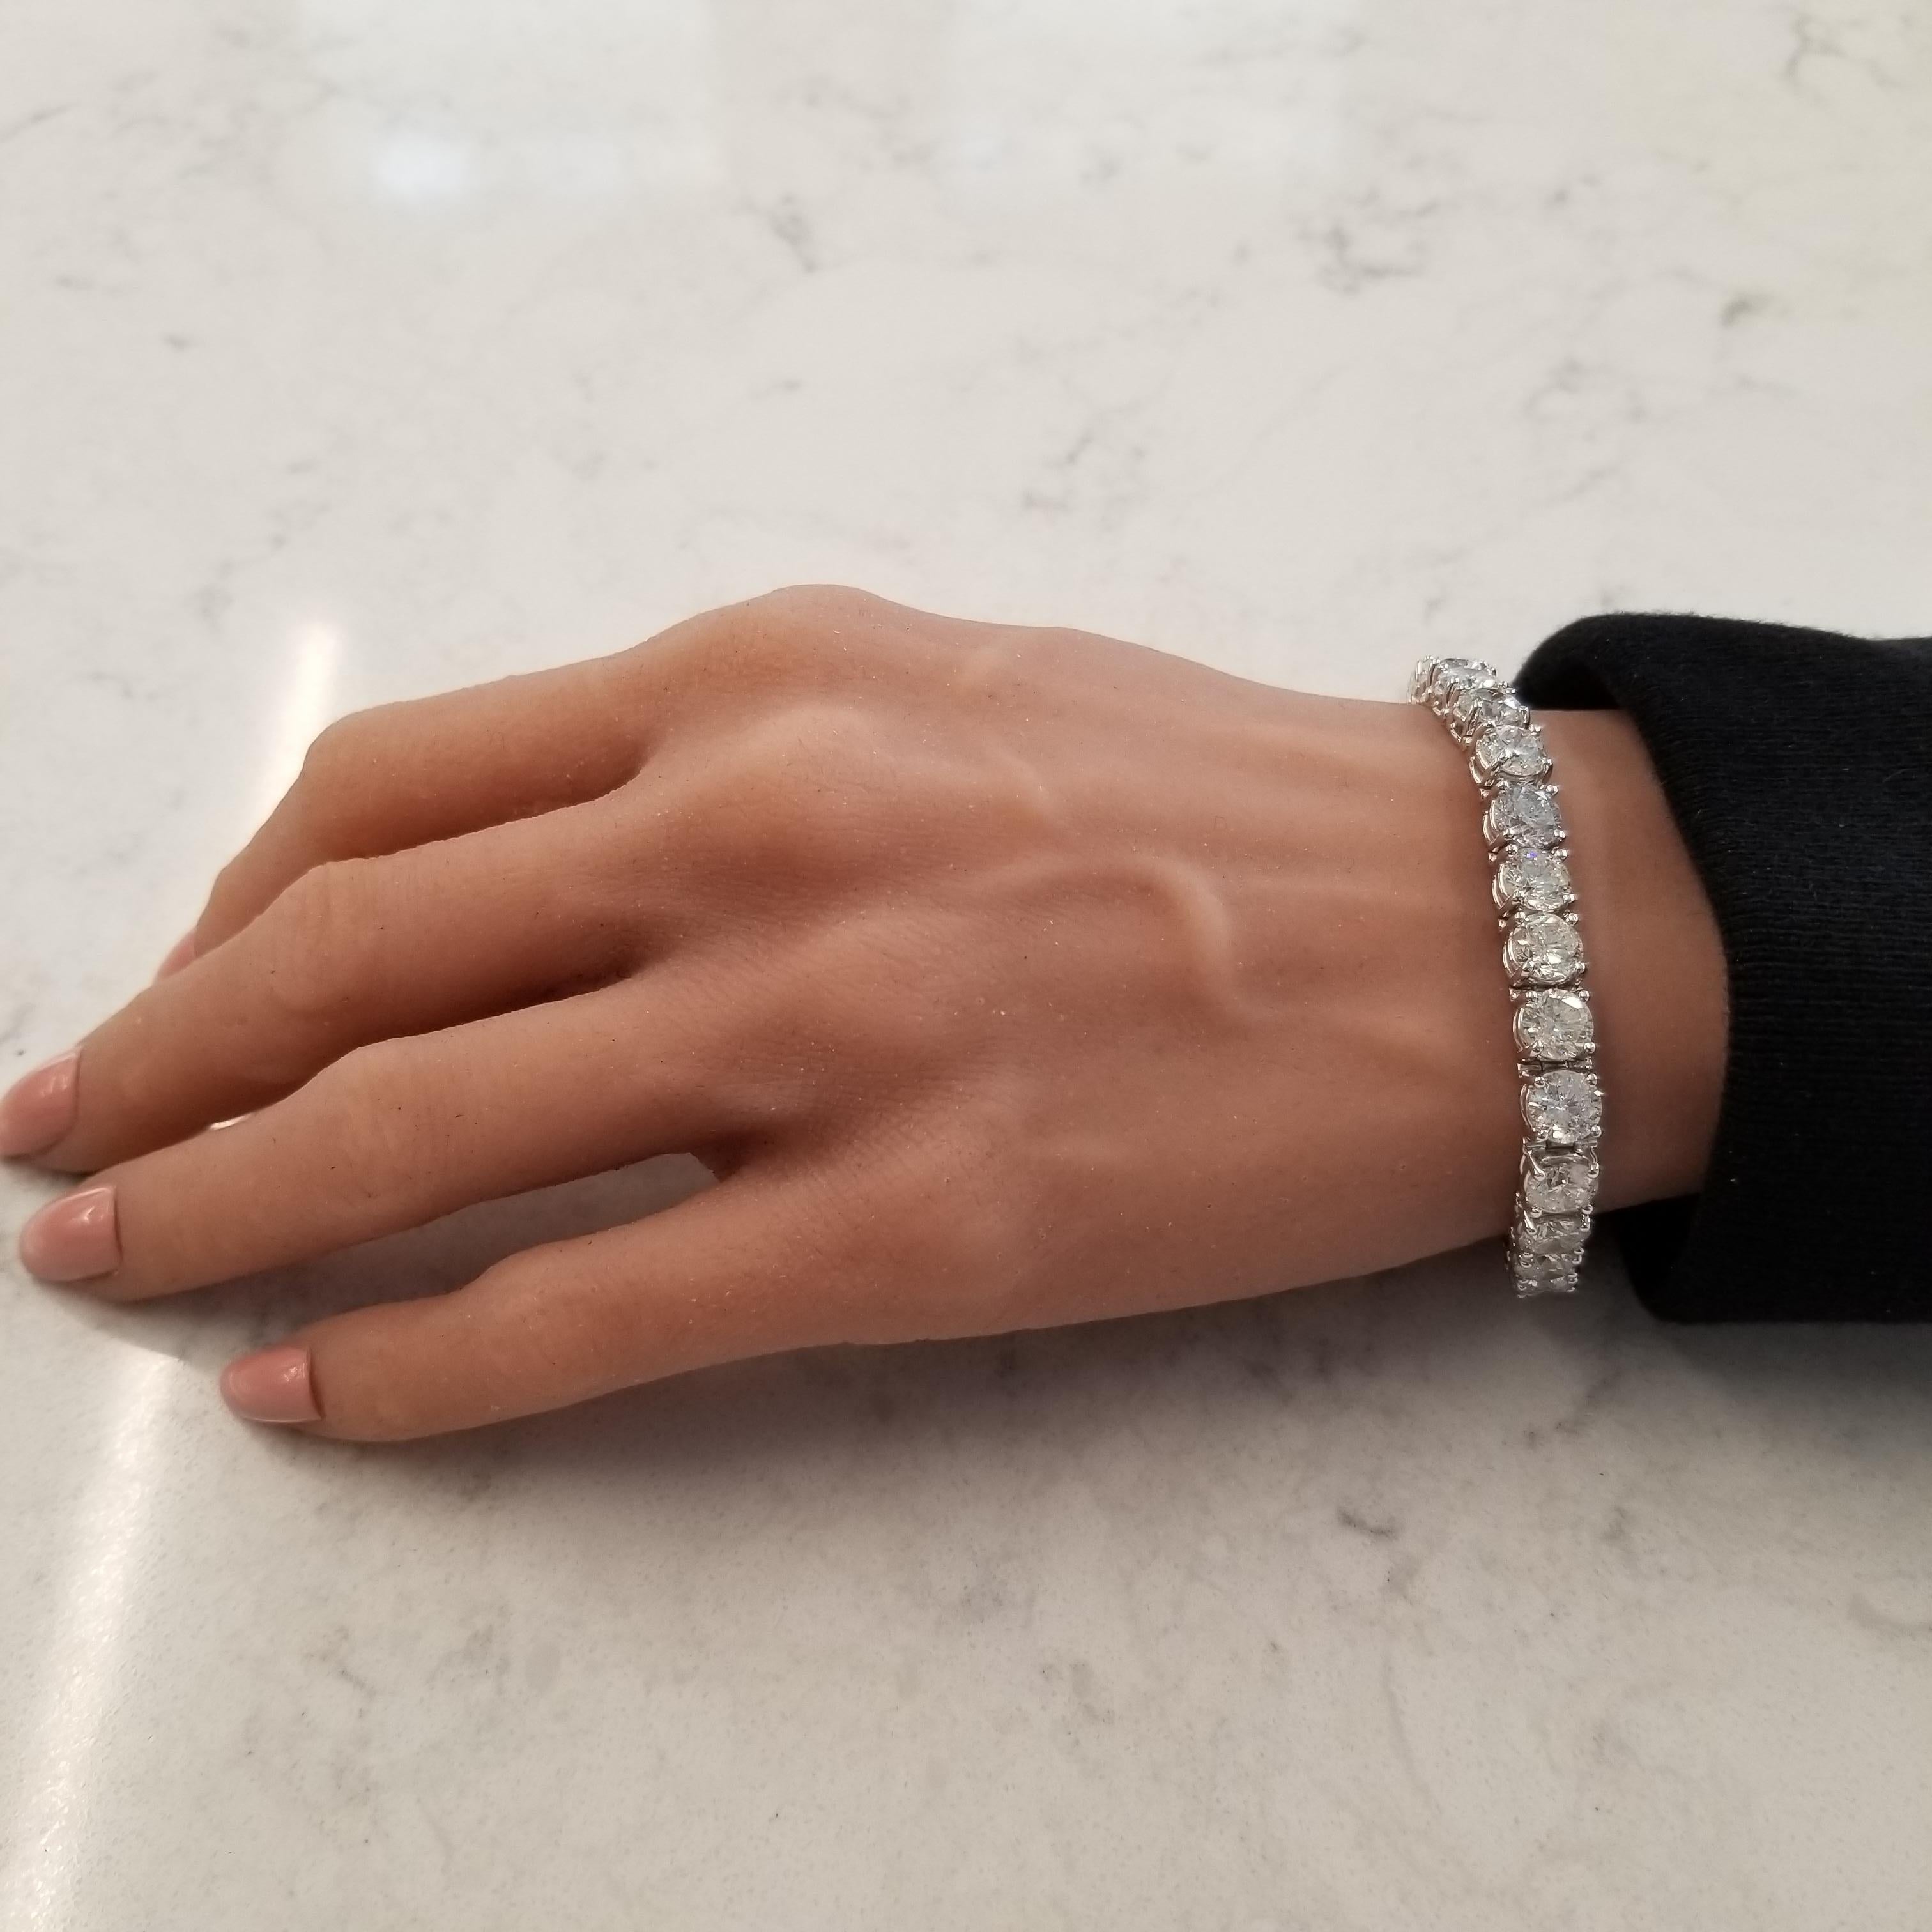 Designed in 18 karat white gold, this gorgeous classic tennis bracelet features a total of 28.42 carats of 27 sparkling round brilliant cut diamonds that are basket prong set around it, eternity style. This sophisticated tennis bracelet is finished